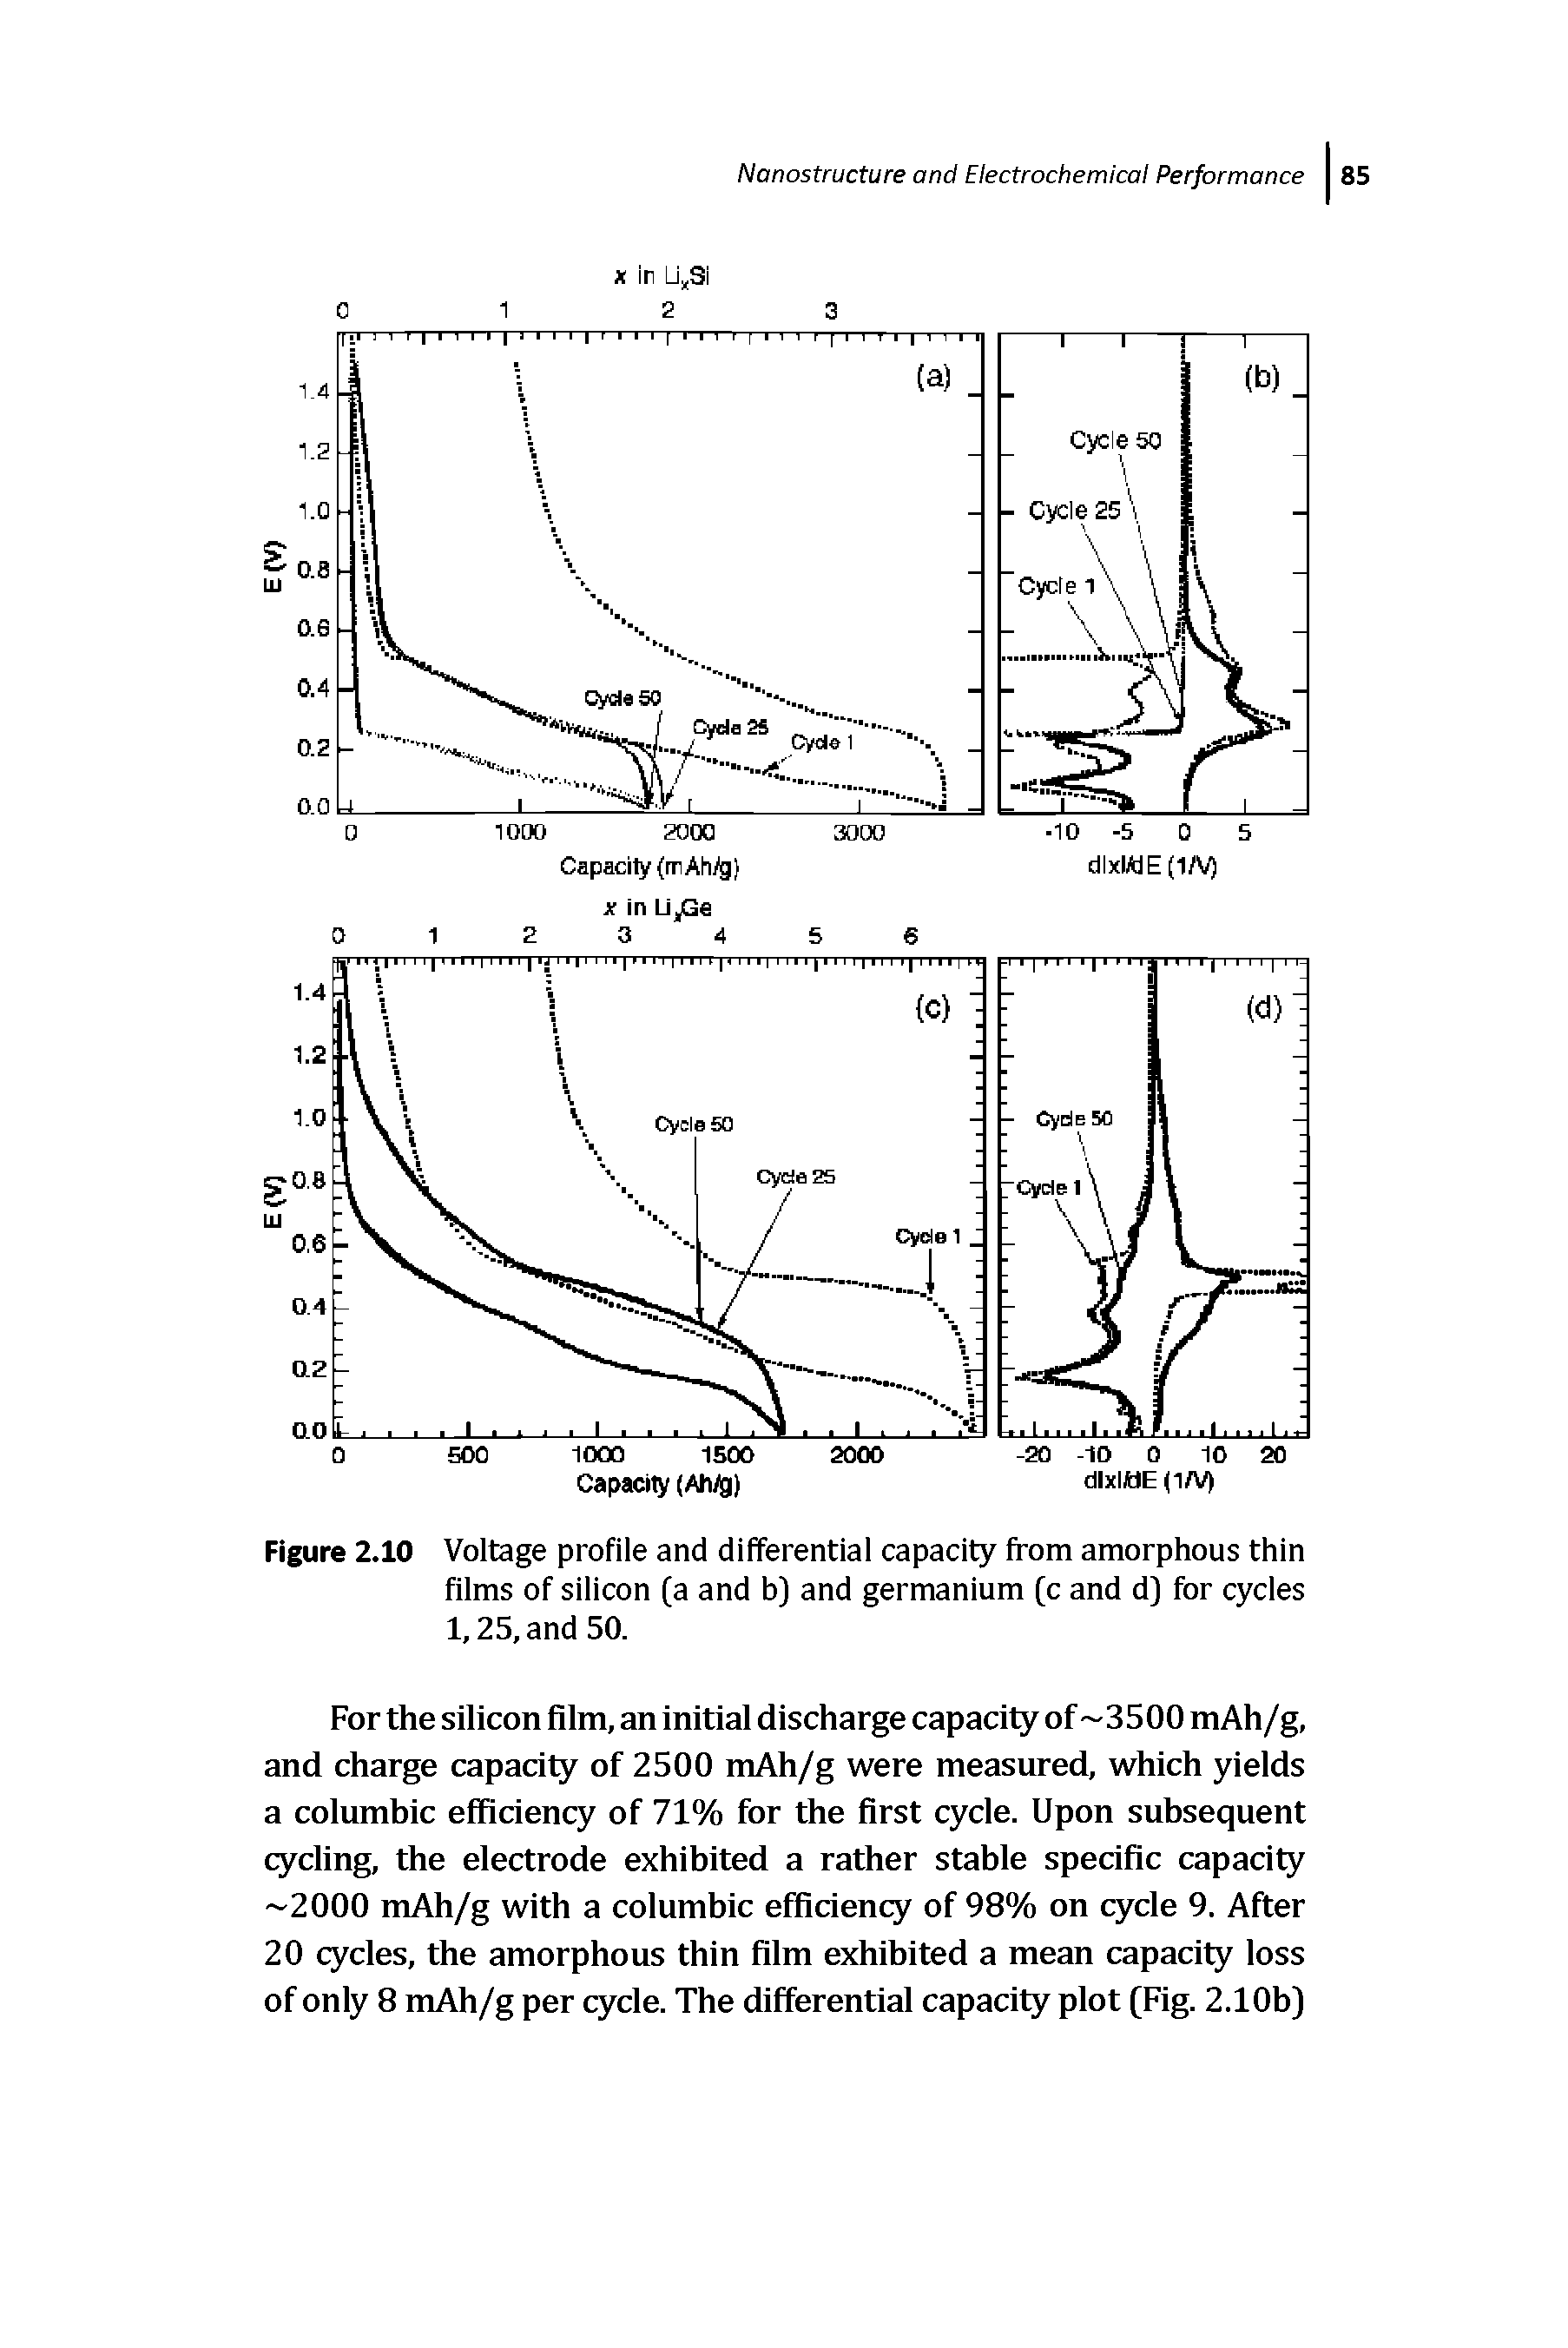 Figure 2.10 Voltage profile and differential capacity from amorphous thin films of silicon (a and b) and germanium [c and d) for cycles 1,25, and 50.